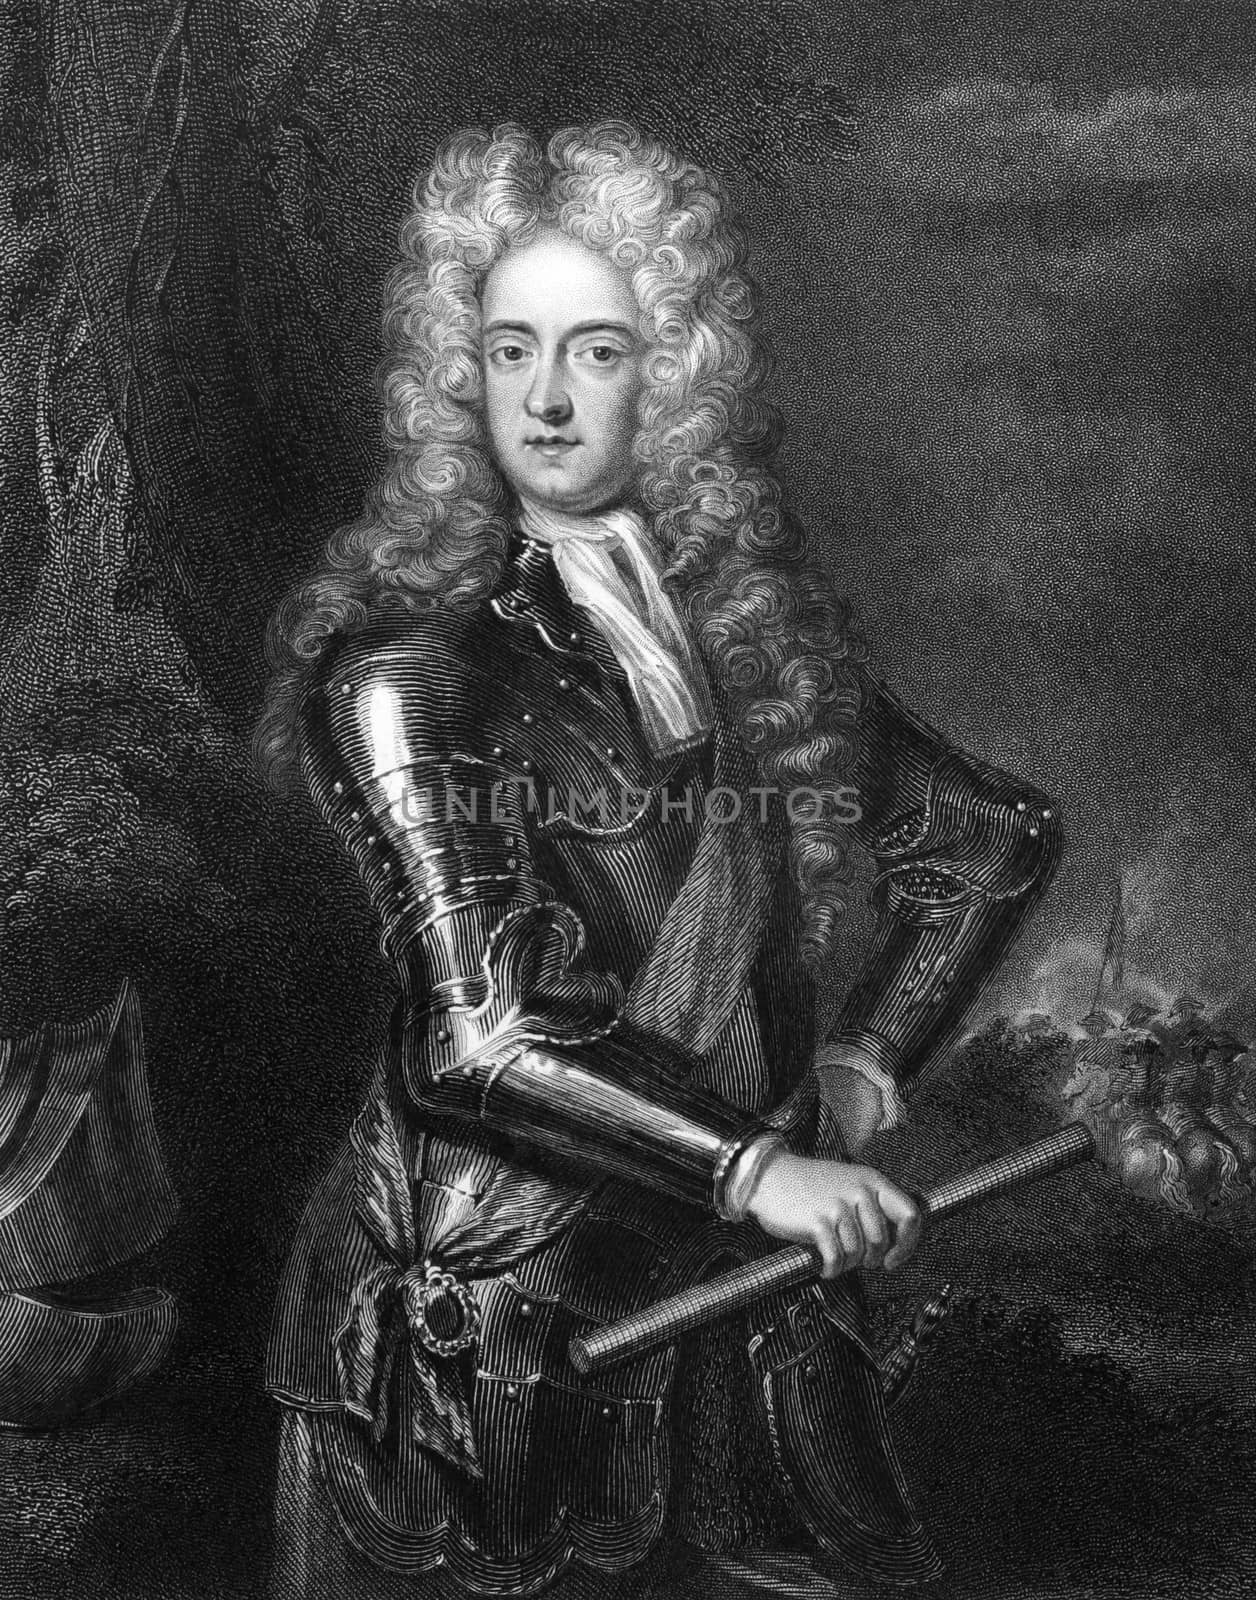 James Butler, 2nd Duke of Ormonde (1665-1745) on engraving from 1830. Irish statesman and soldier. Engraved by H.Robinson and published in ''Portraits of Illustrious Personages of Great Britain'',UK,1830.